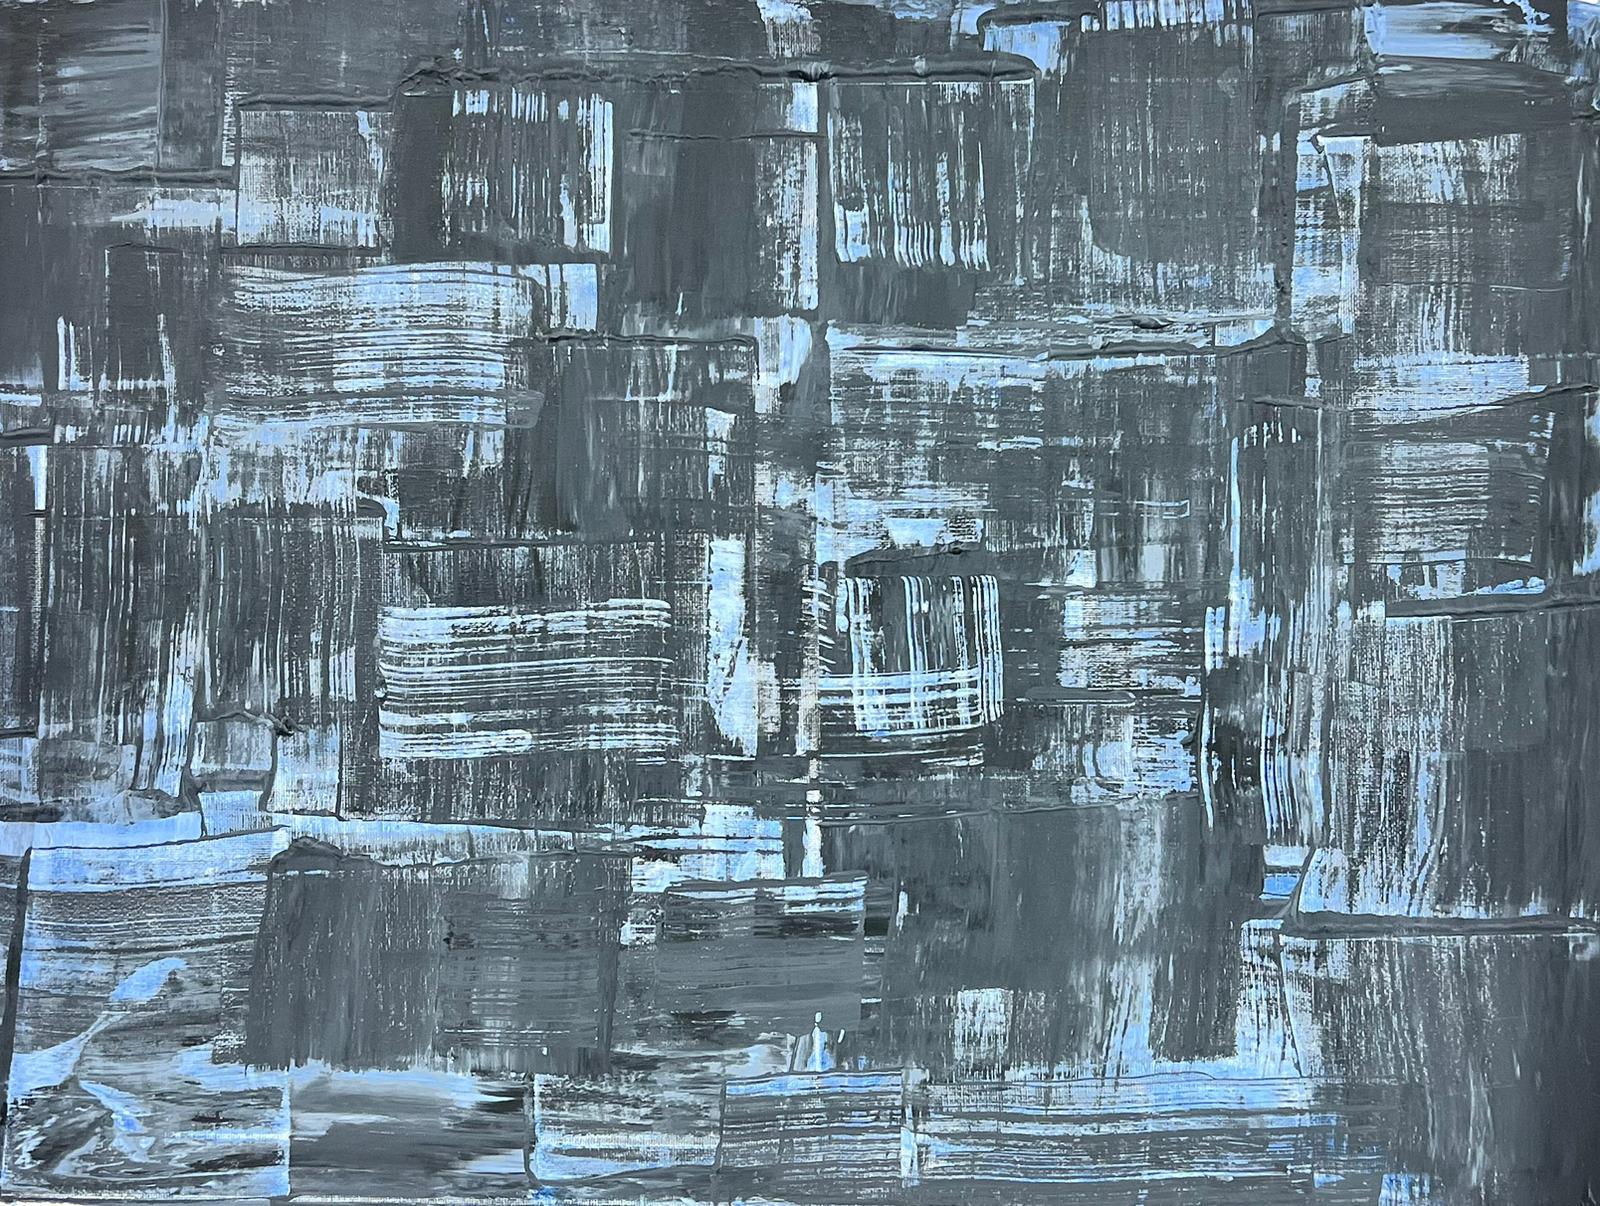 Robert Somerton Abstract Painting - Black Grey Blue British Expressionist Abstract Original Painting on canvas